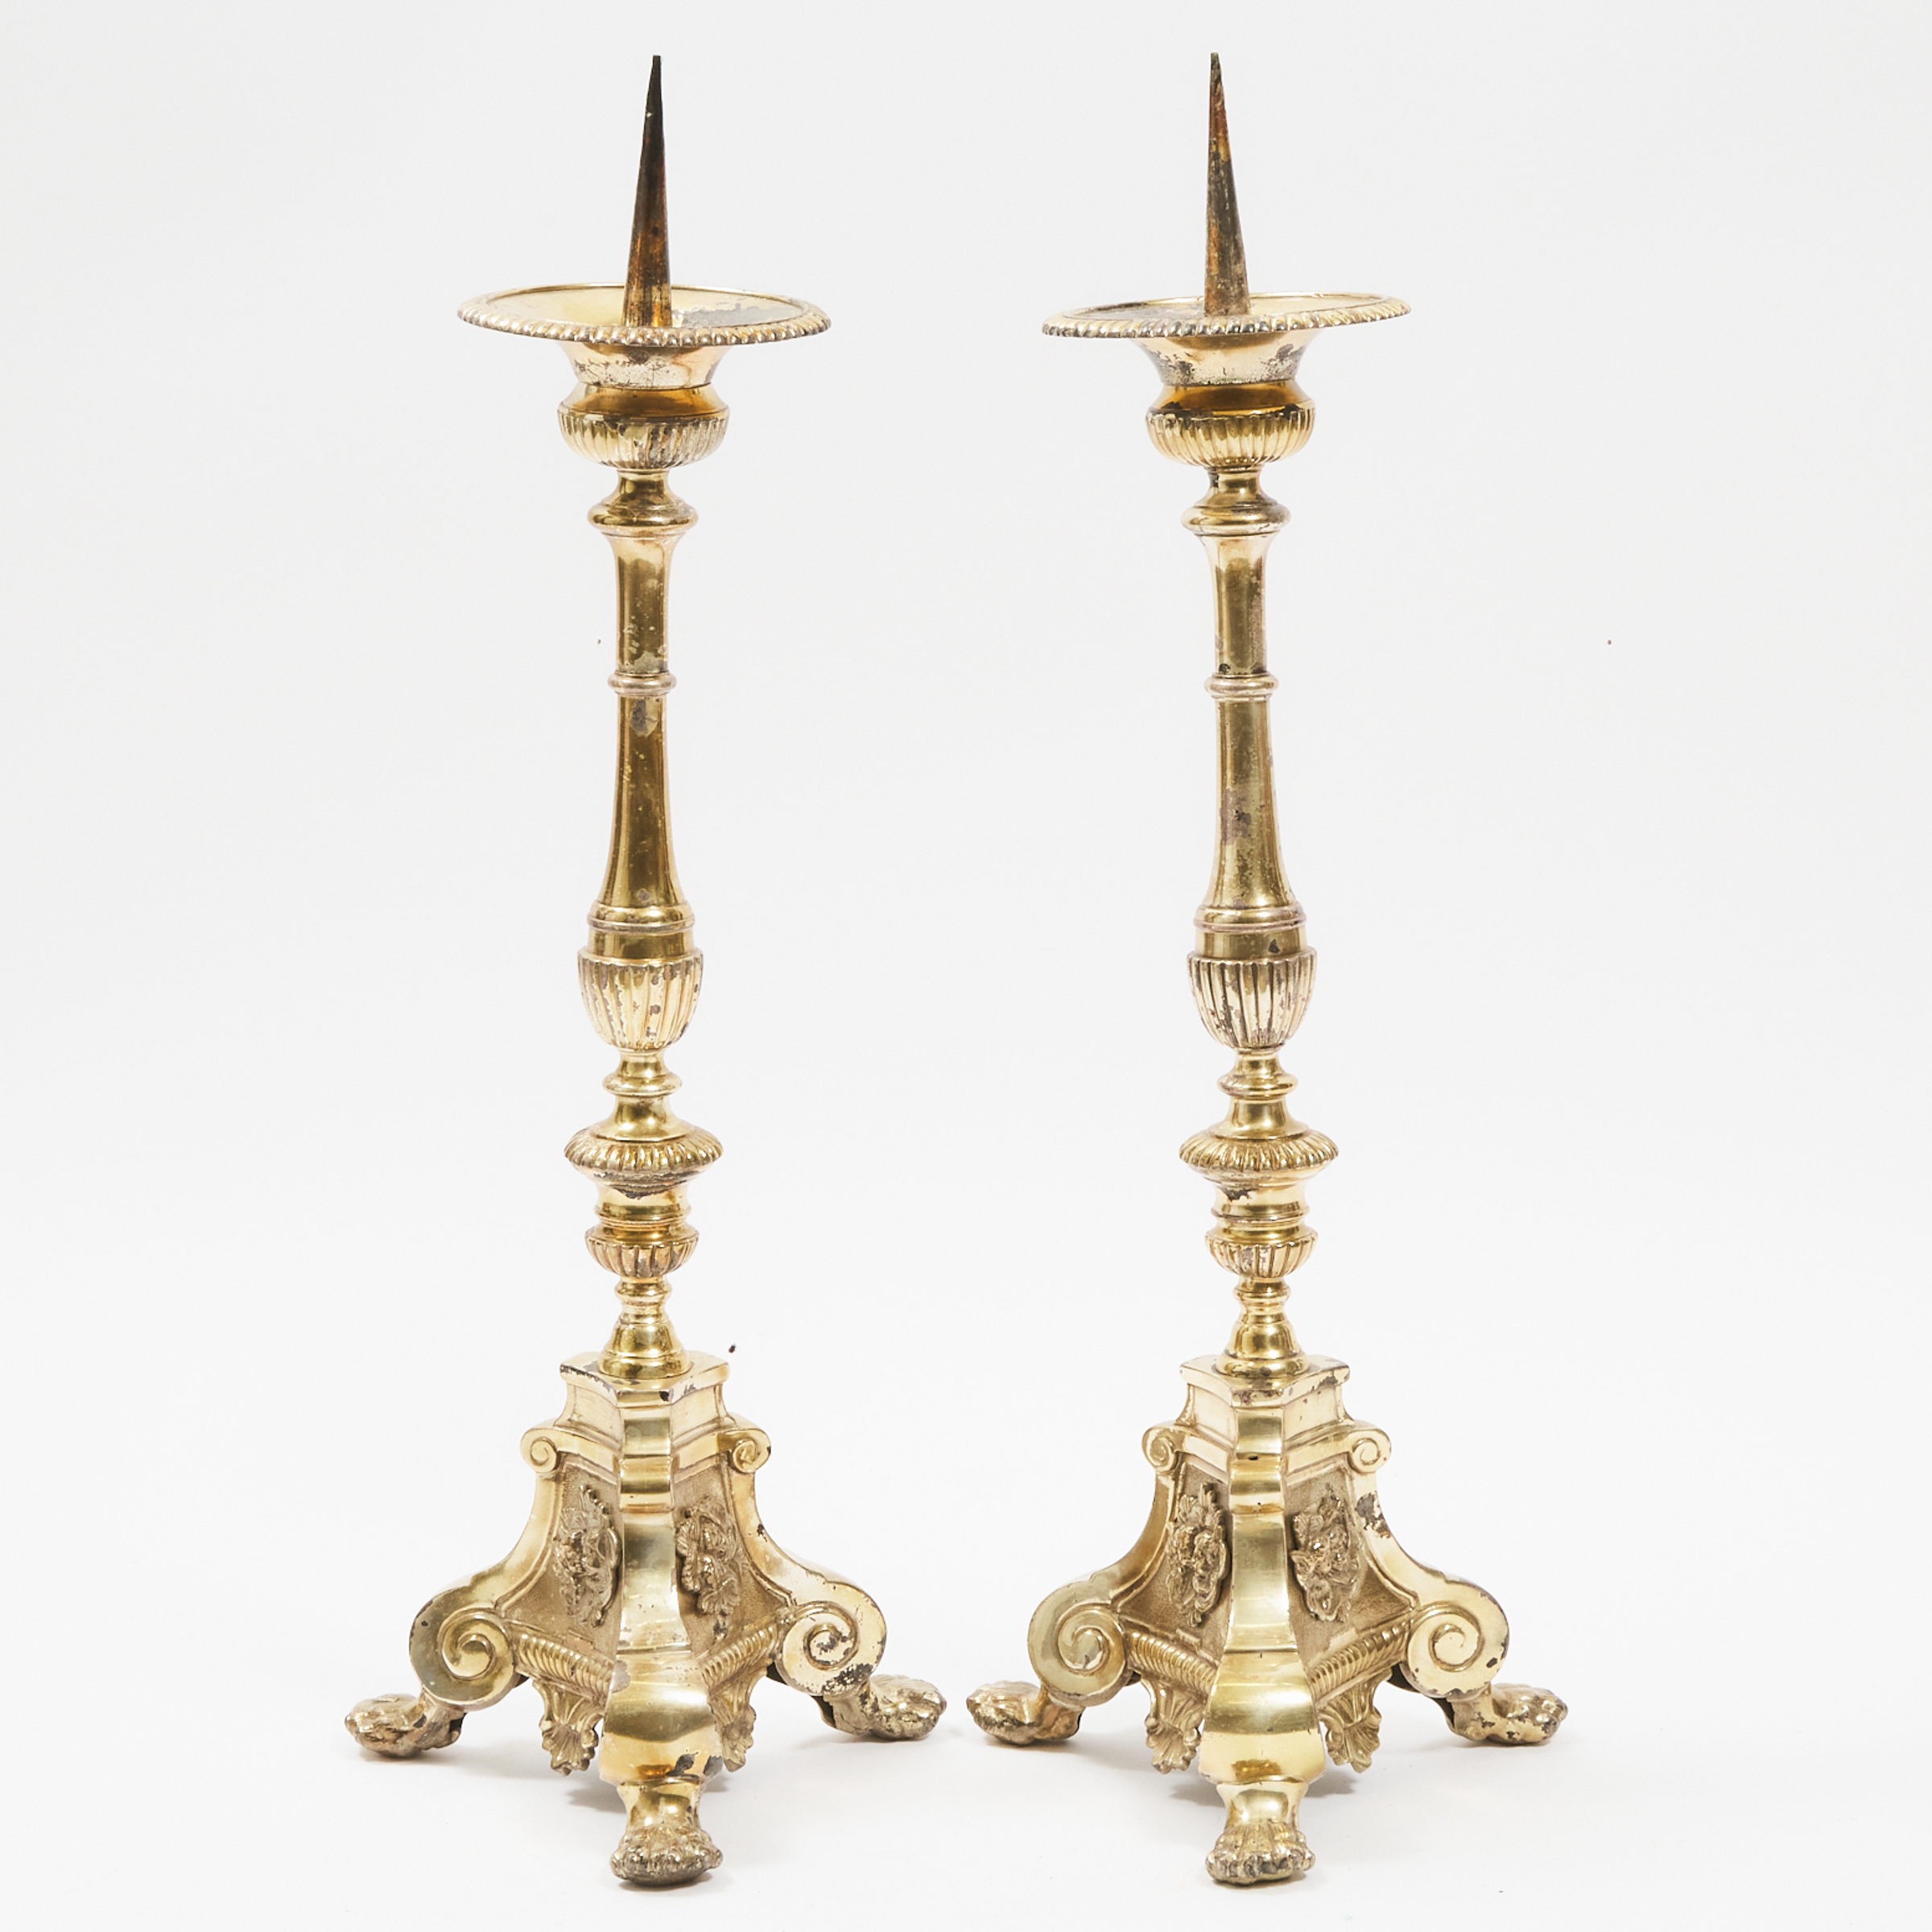 Pair of French Silvered Bronze Altar Pricket Candlesticks, c.1840